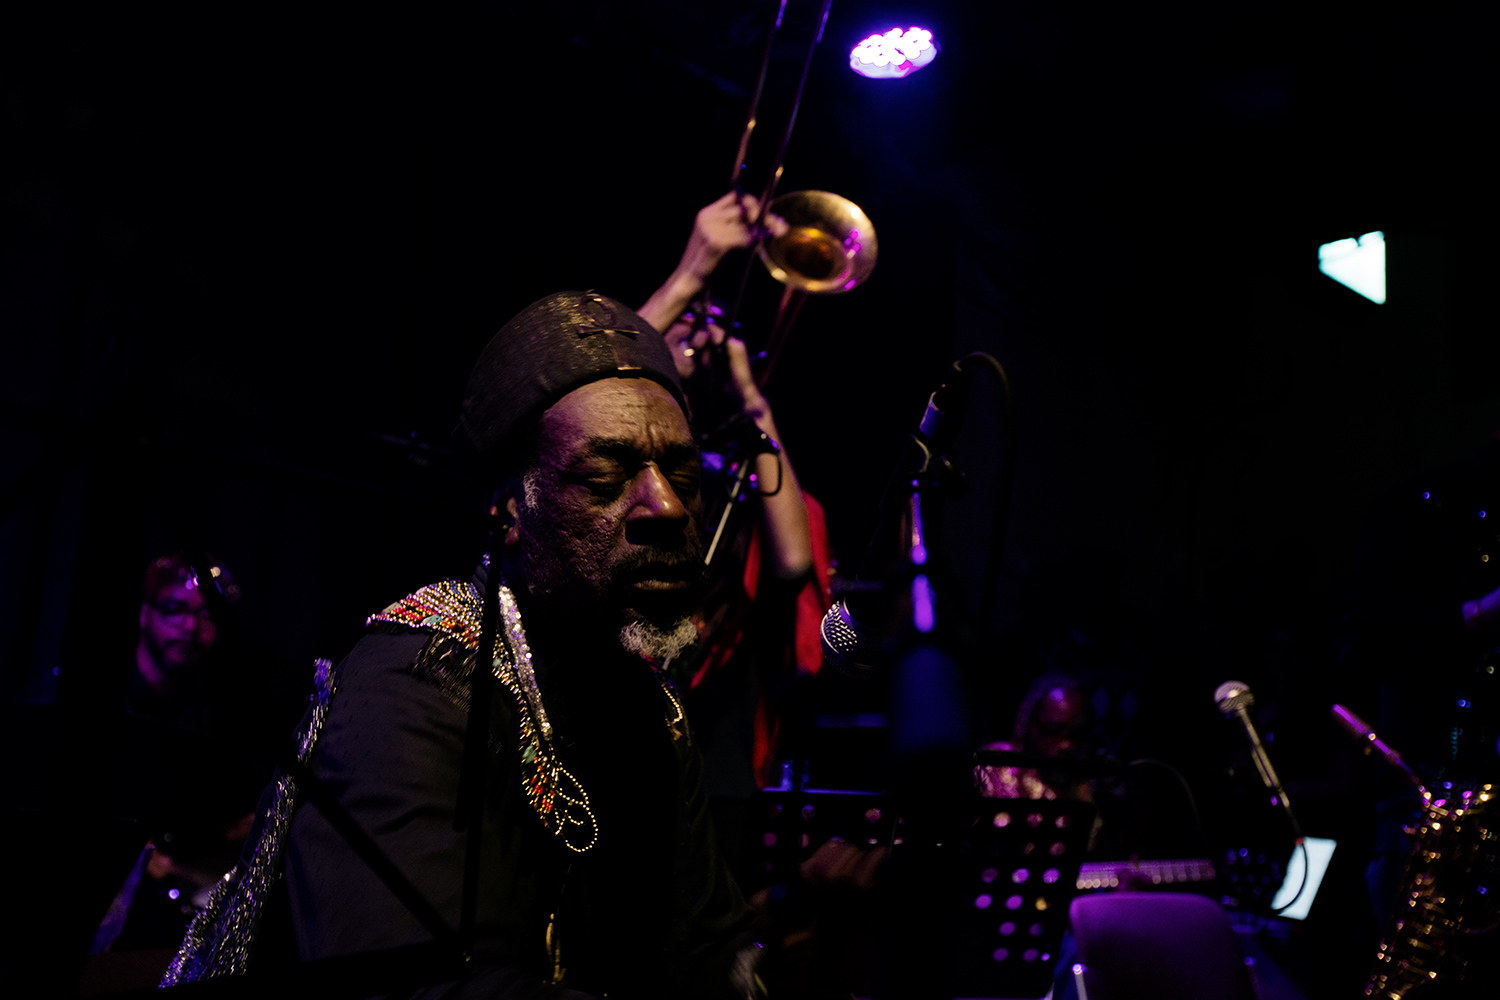 Sun Ra Arkestra directed by Marshall Allen by Laurent Orseau - Concert - Les Ateliers Claus - Brussels, Belgium #14